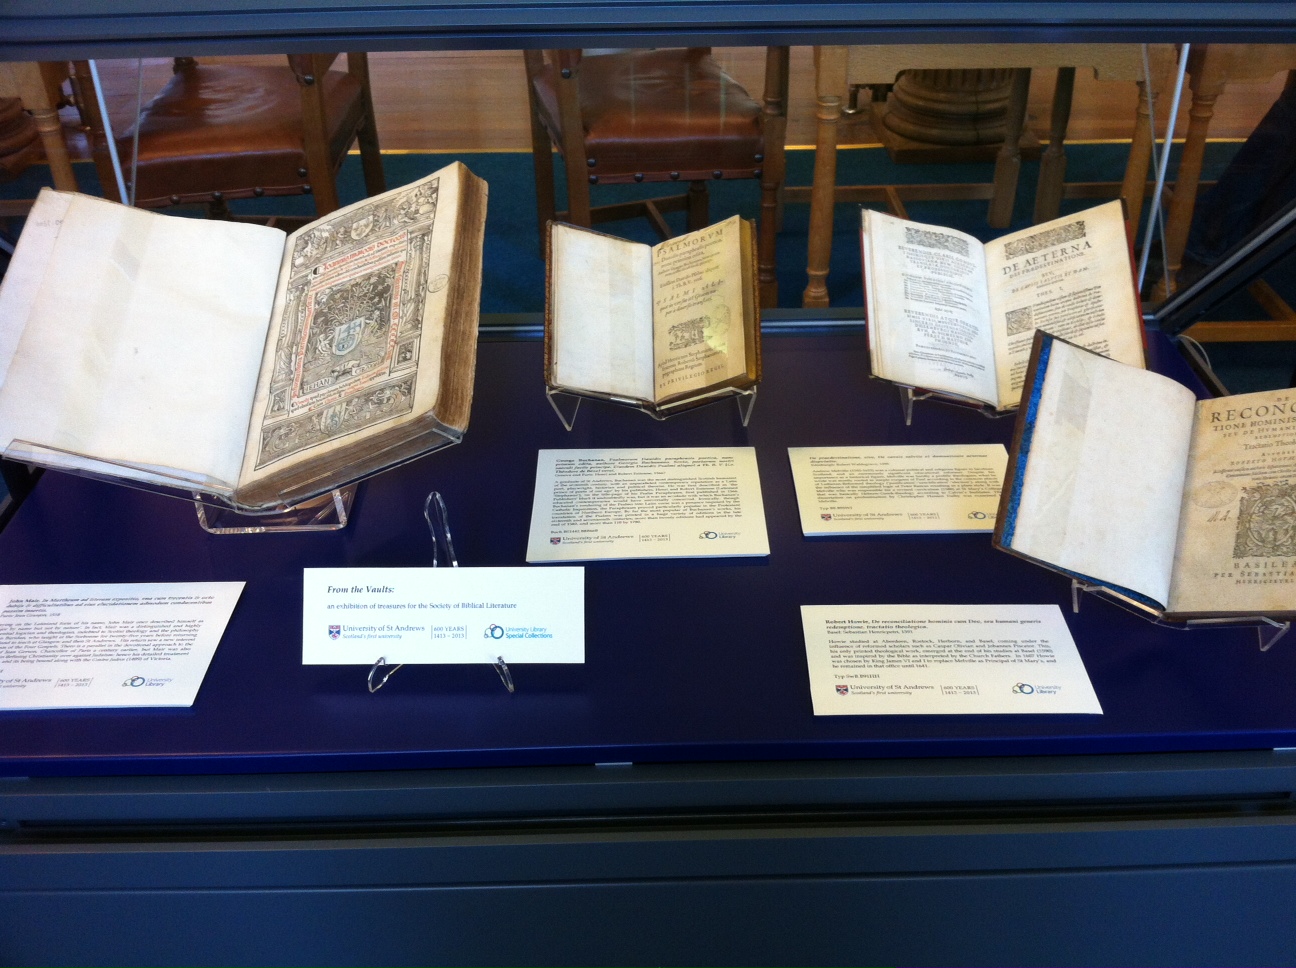 One of two display cases in the King James Library arranged for the Society of Biblical Literature conference, featuring works 